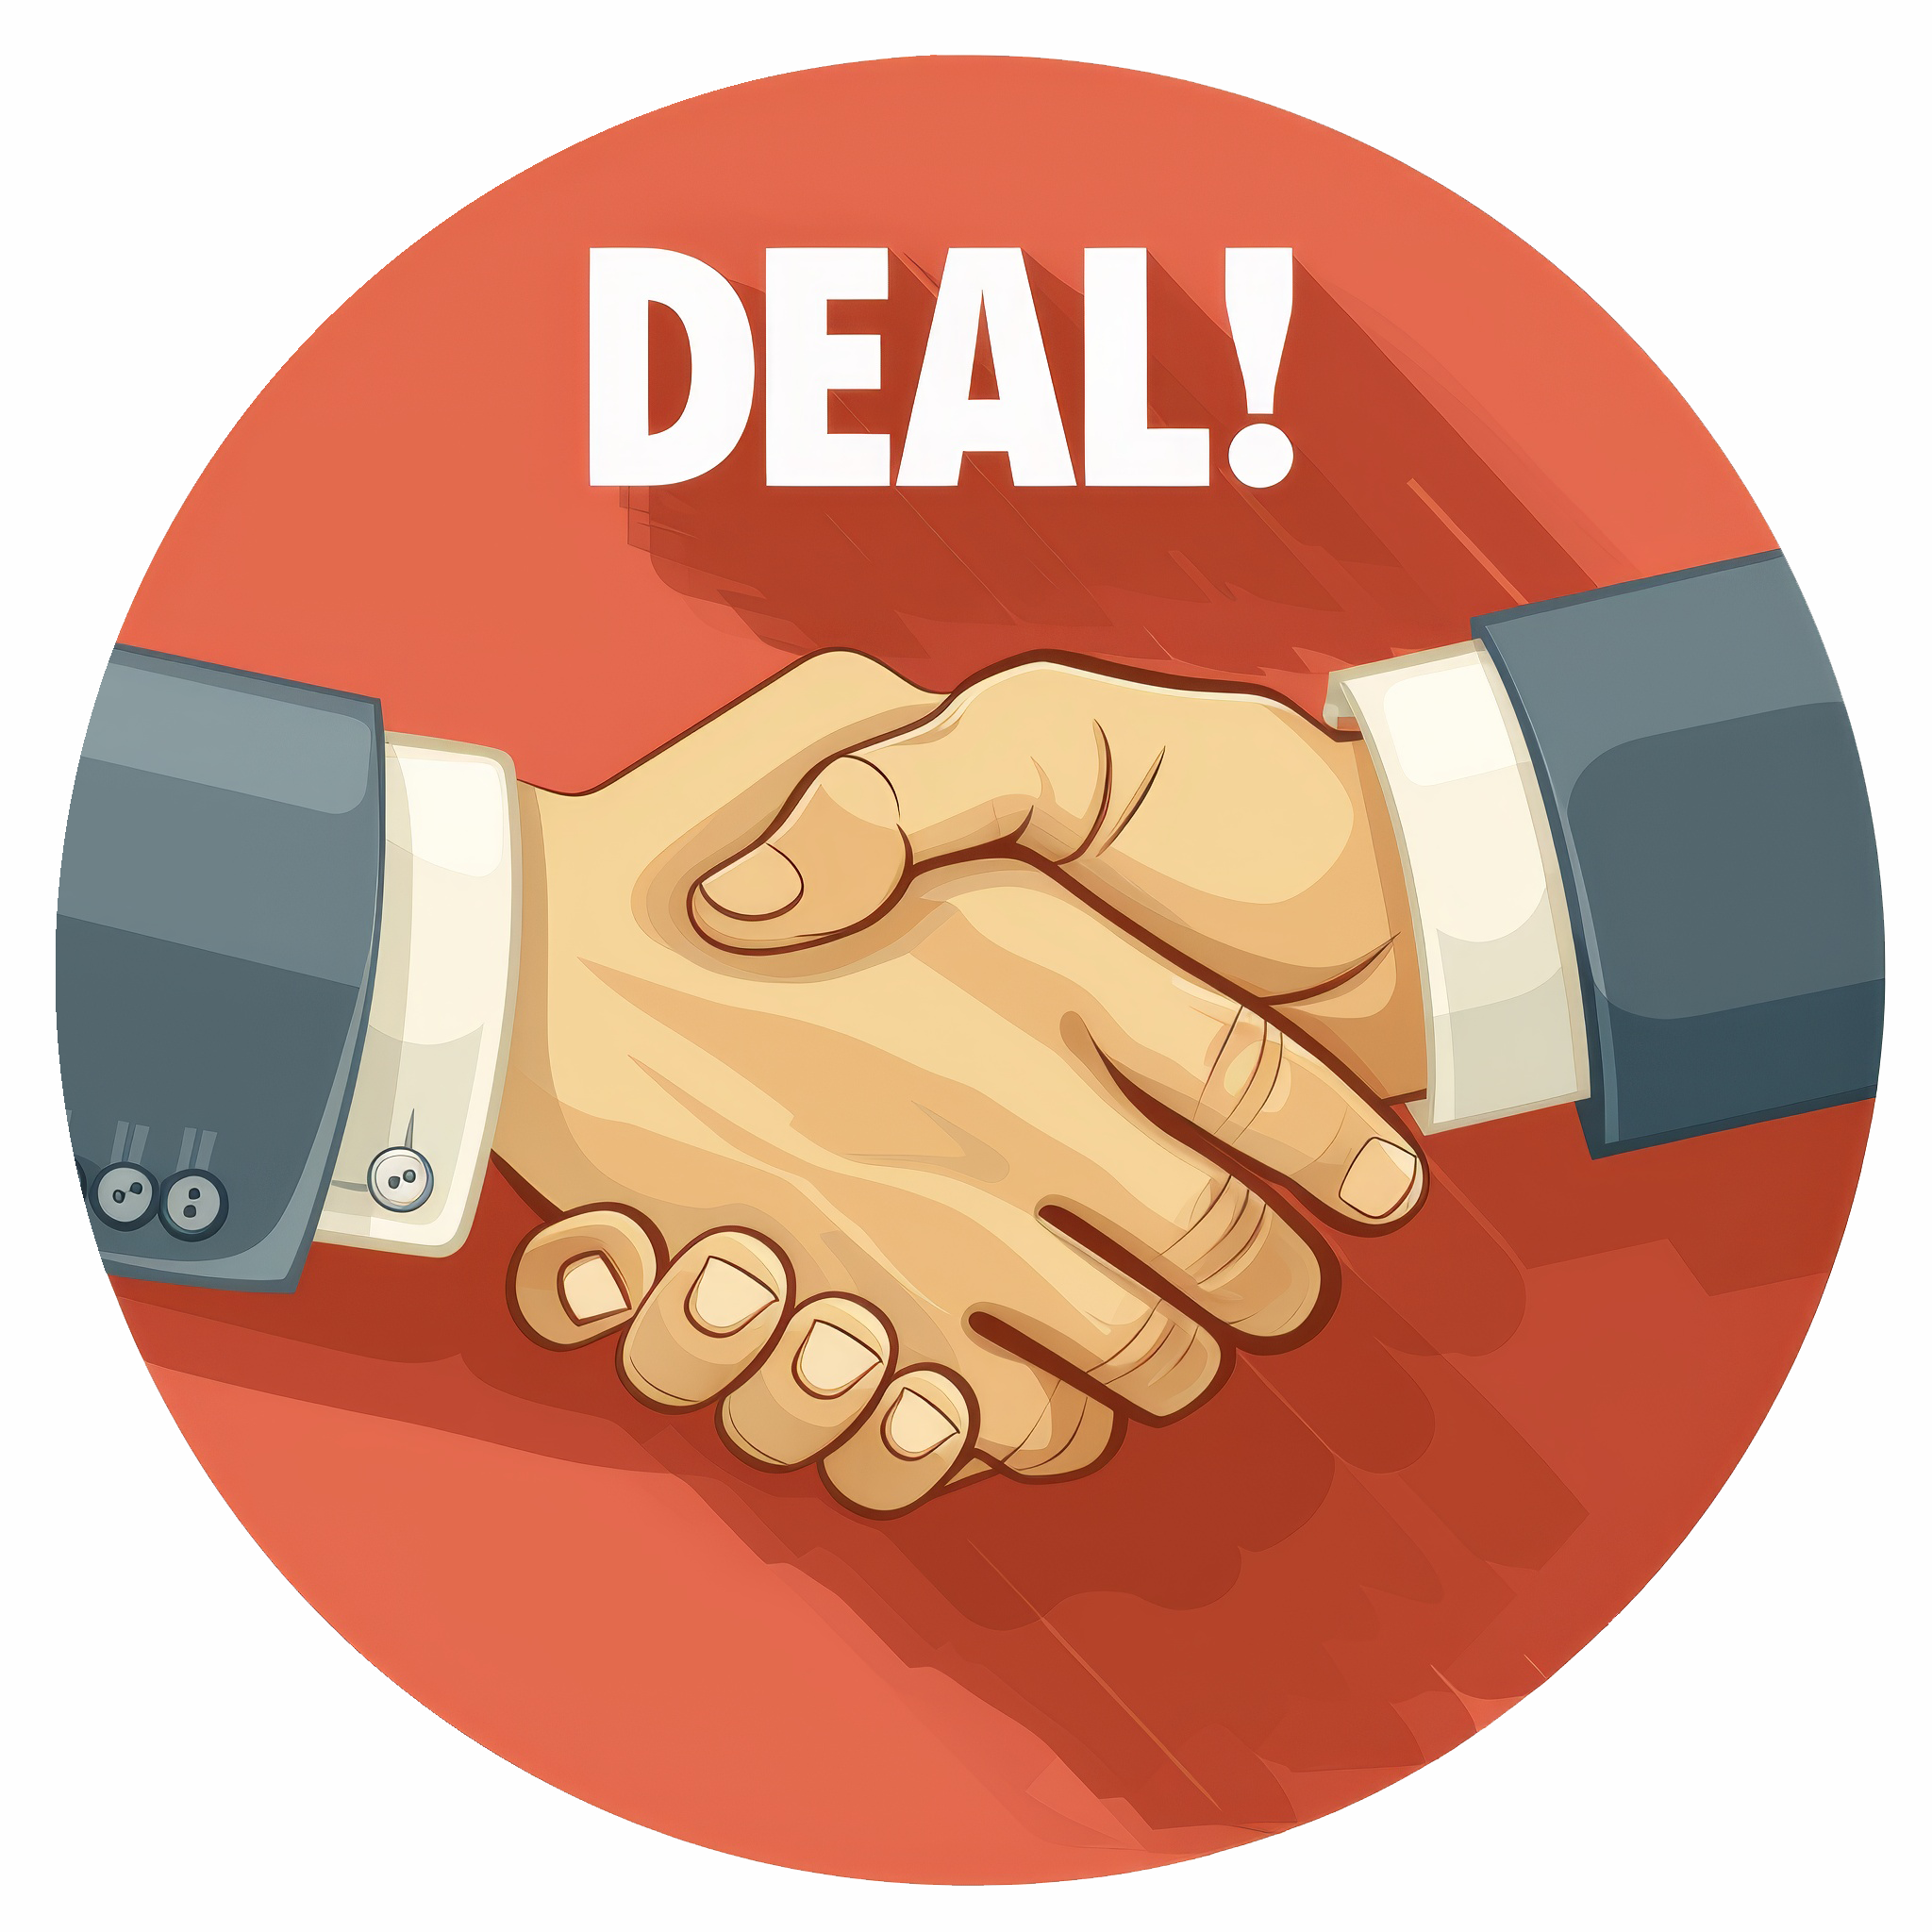 Business deal, Shaking hand as business agreement concept